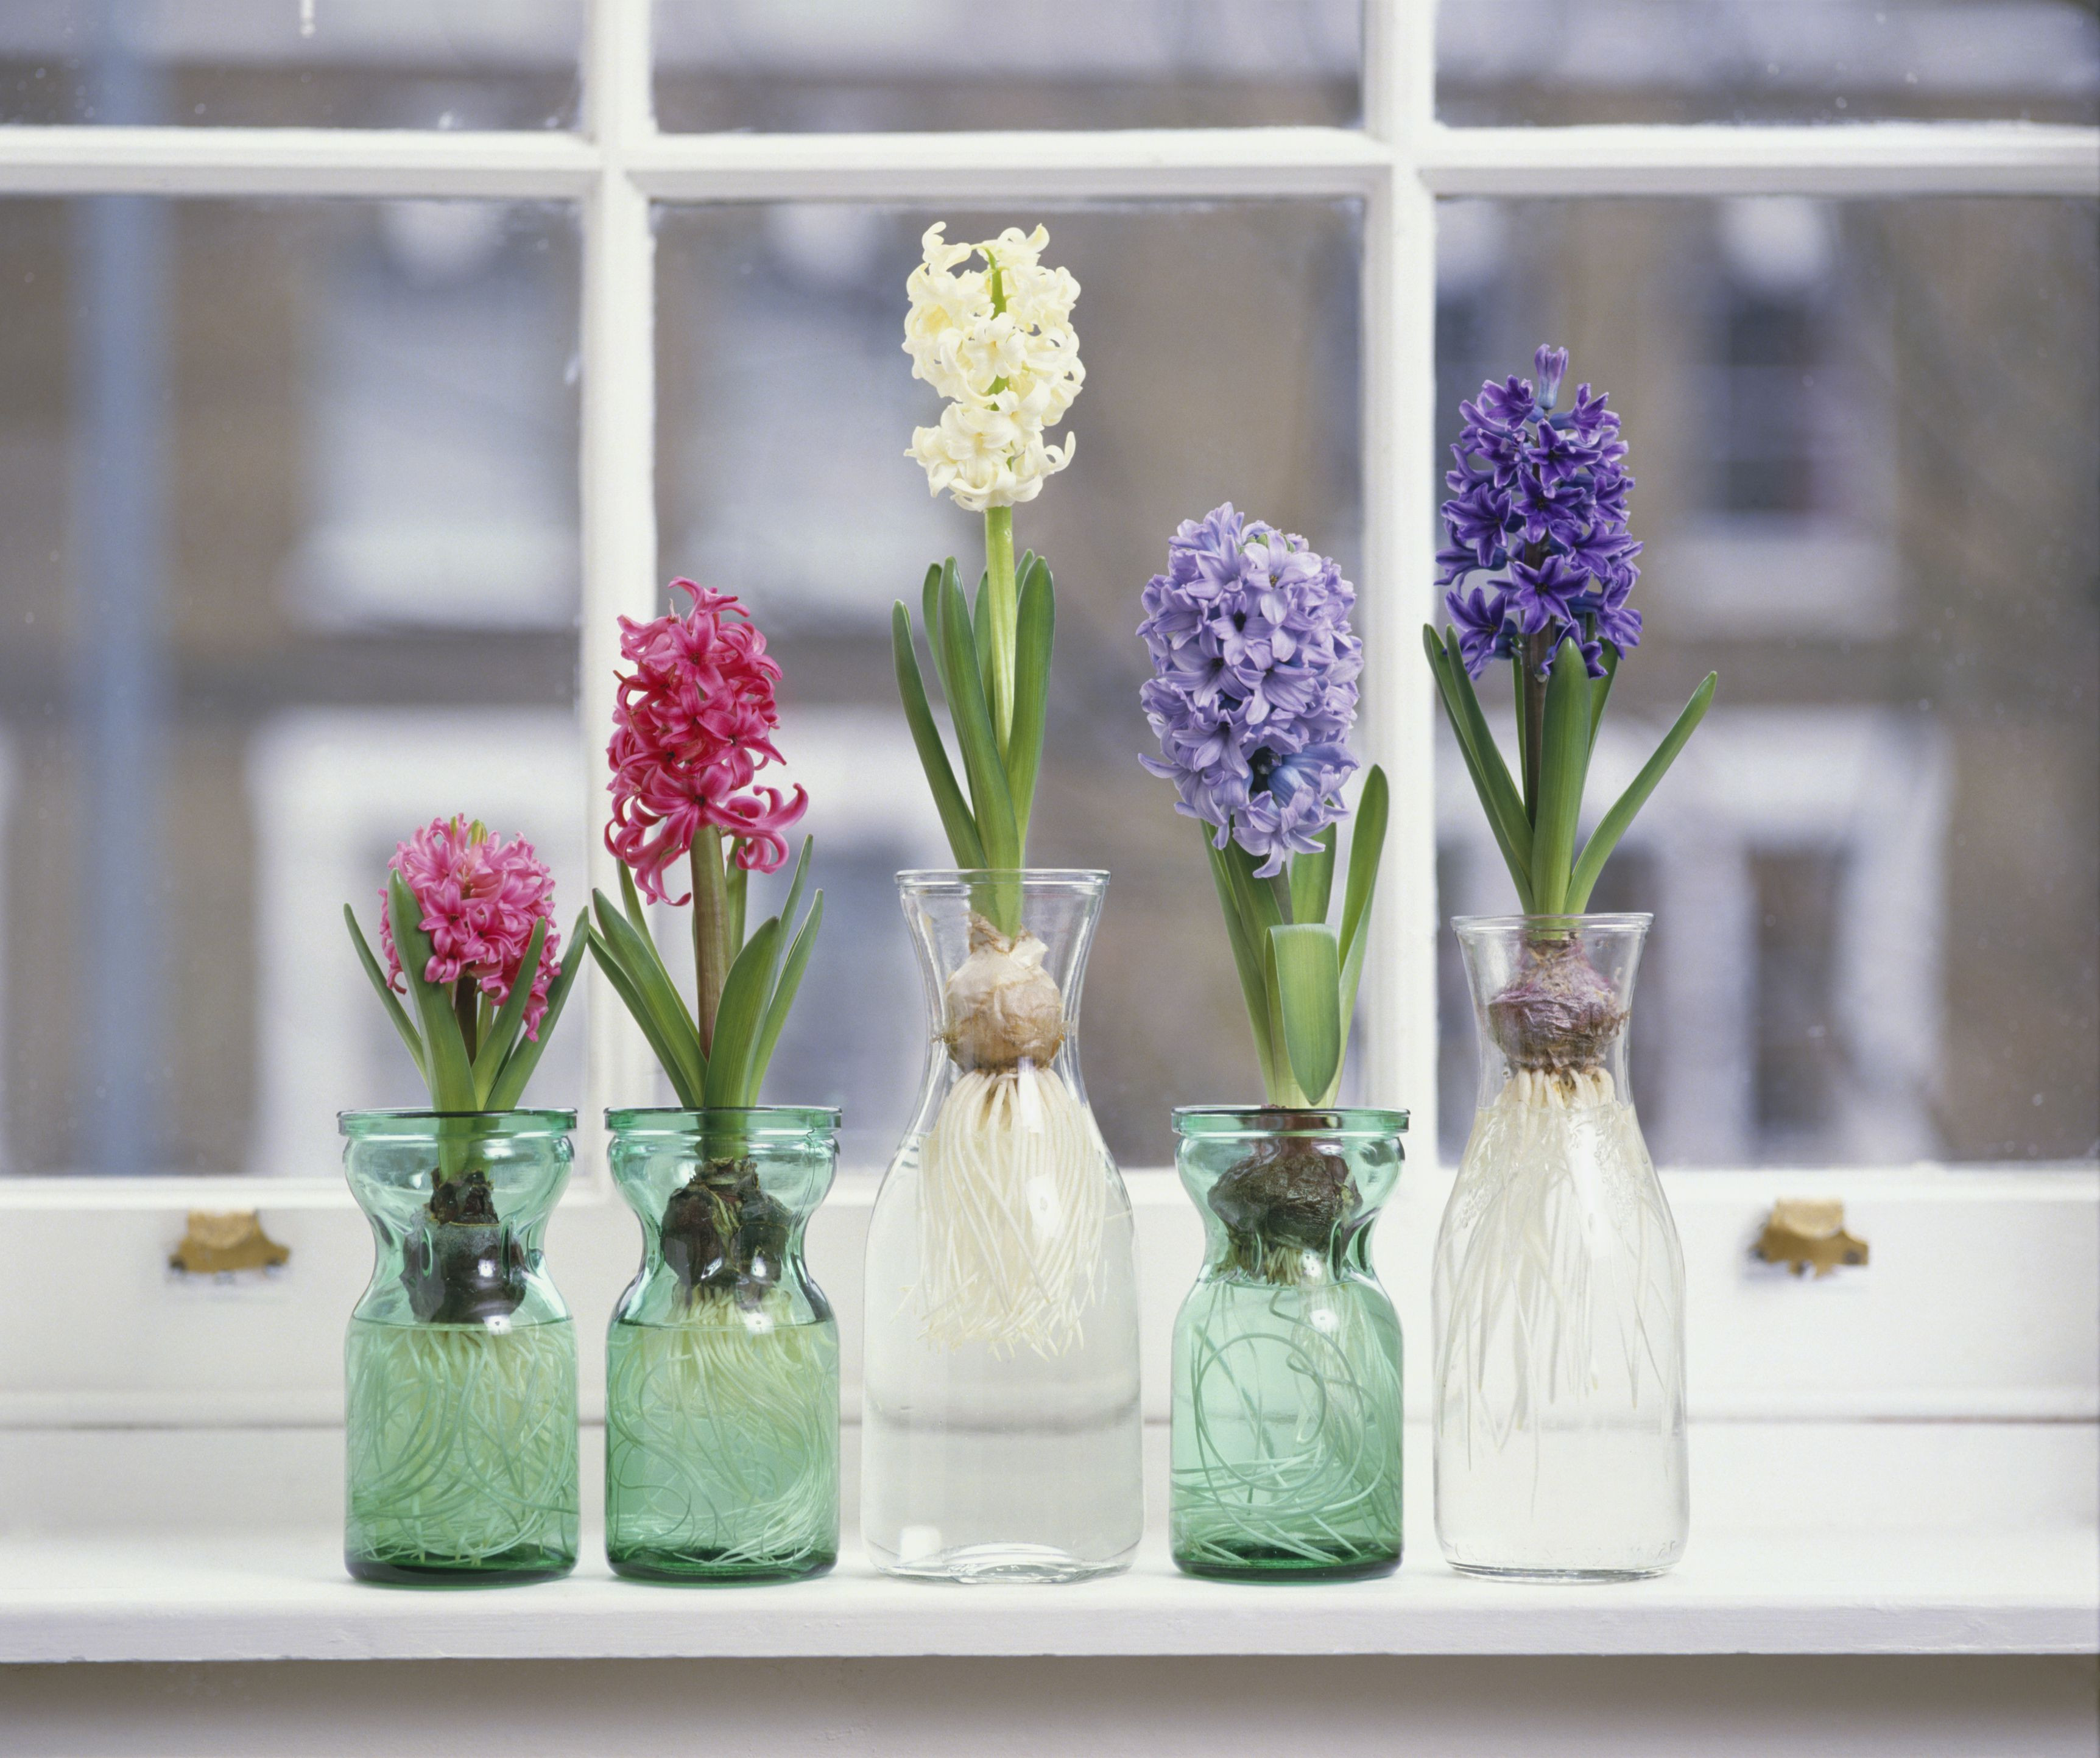 19 Perfect Bulb forcing Vases for Sale 2024 free download bulb forcing vases for sale of how to grow hyacinth flowers indoors with pink white and purple hyacinthus plants with bulbs in glass jars on window sill 125157739 57c5b8f73df78cc16ead76eb